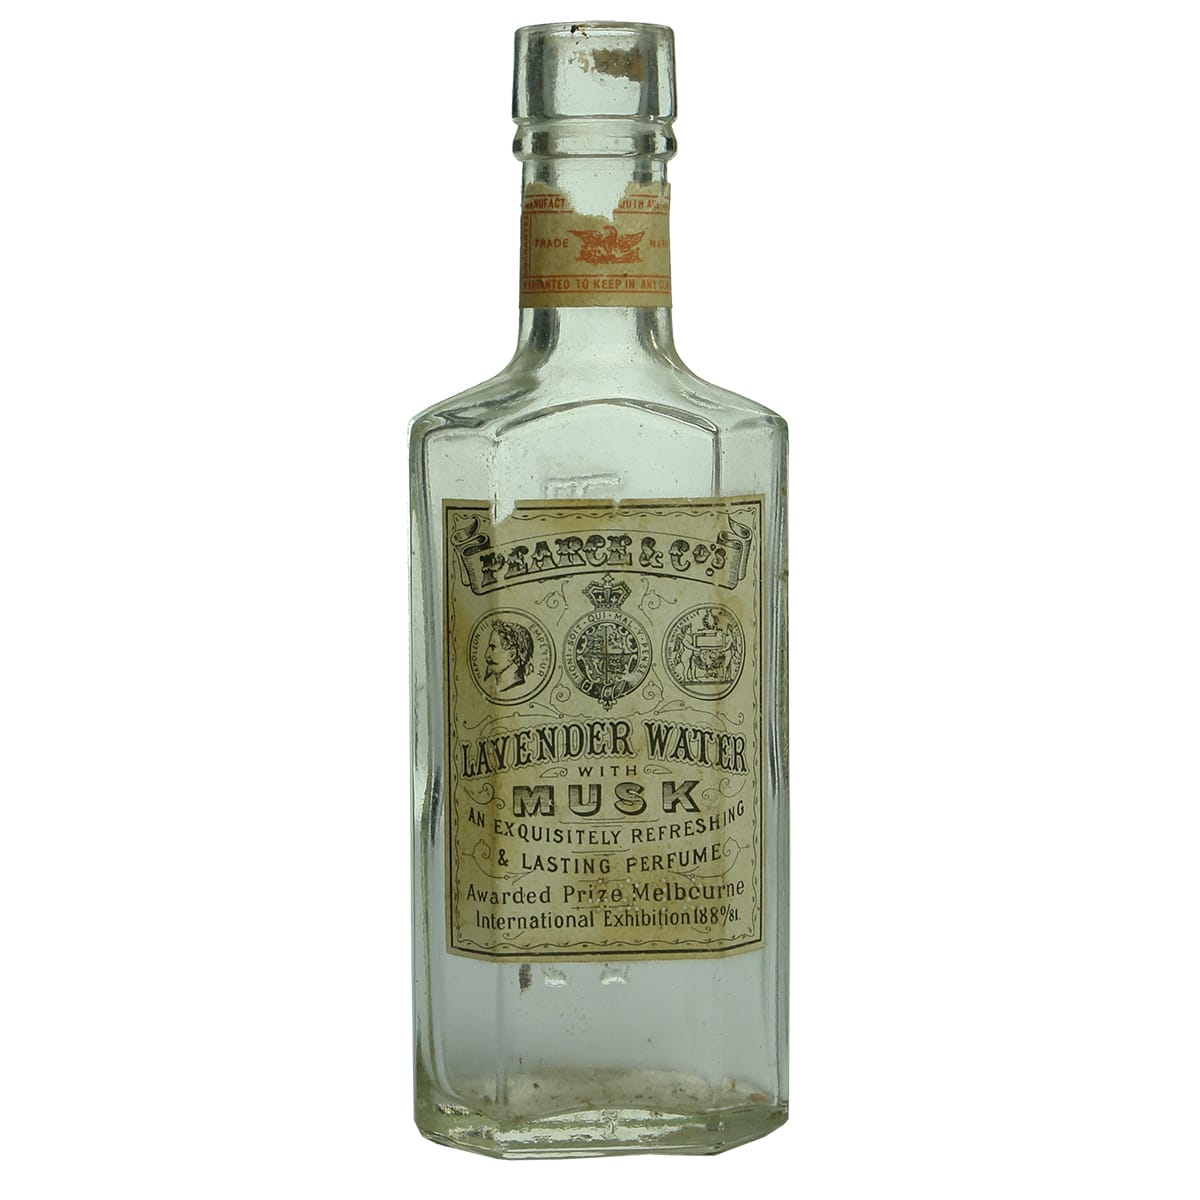 Perfume. Faulding, Pearce & Co's Lavendar Water with musk. Clear. 6 oz.